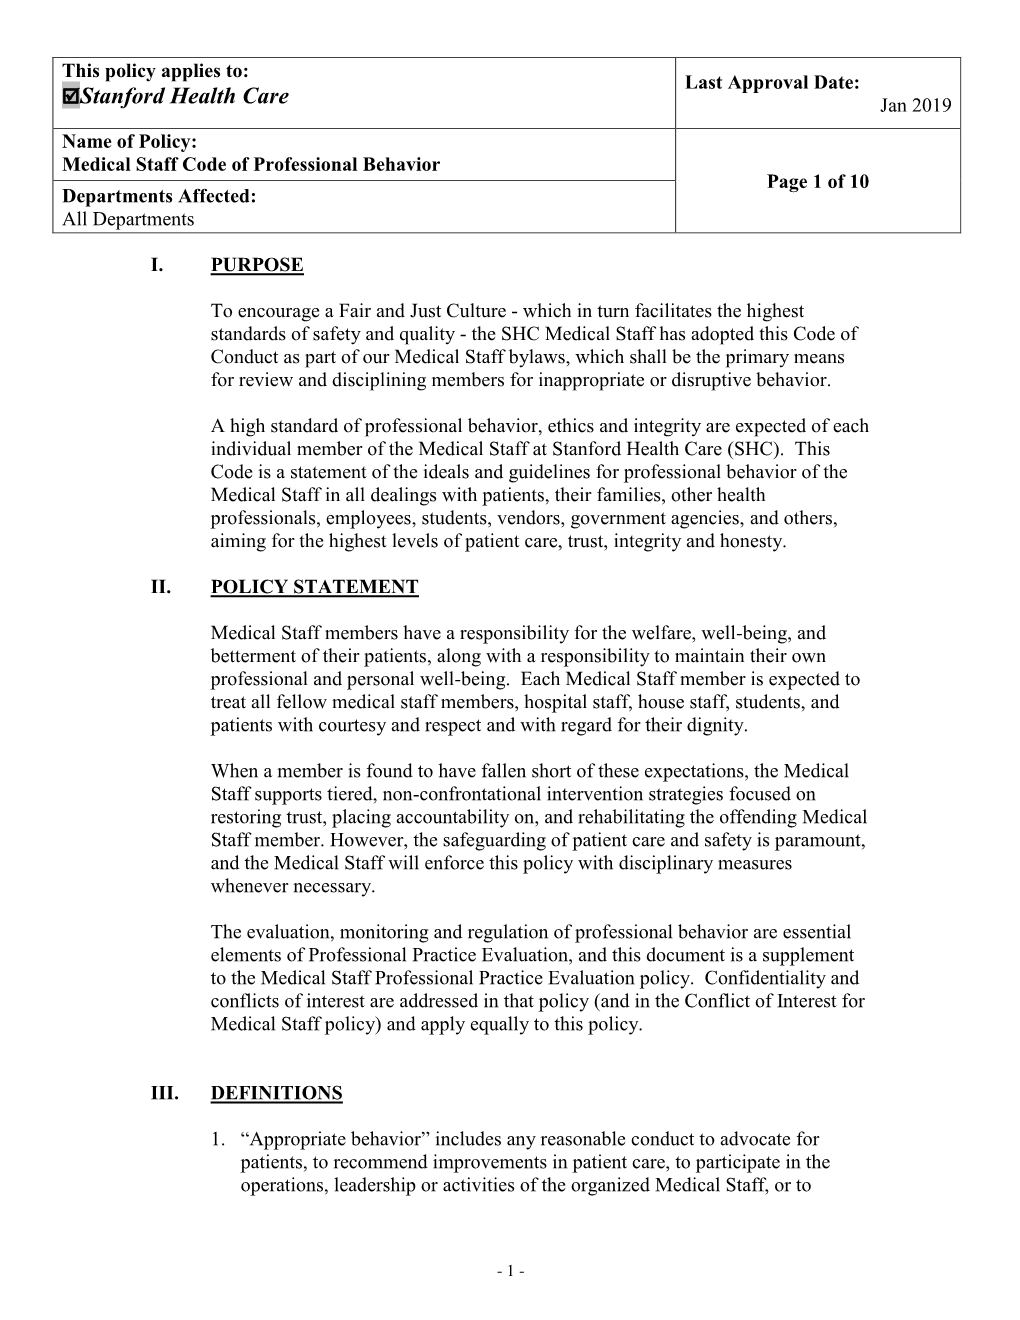 Medical Staff Code of Professional Behavior Page 1 of 10 Departments Affected: All Departments